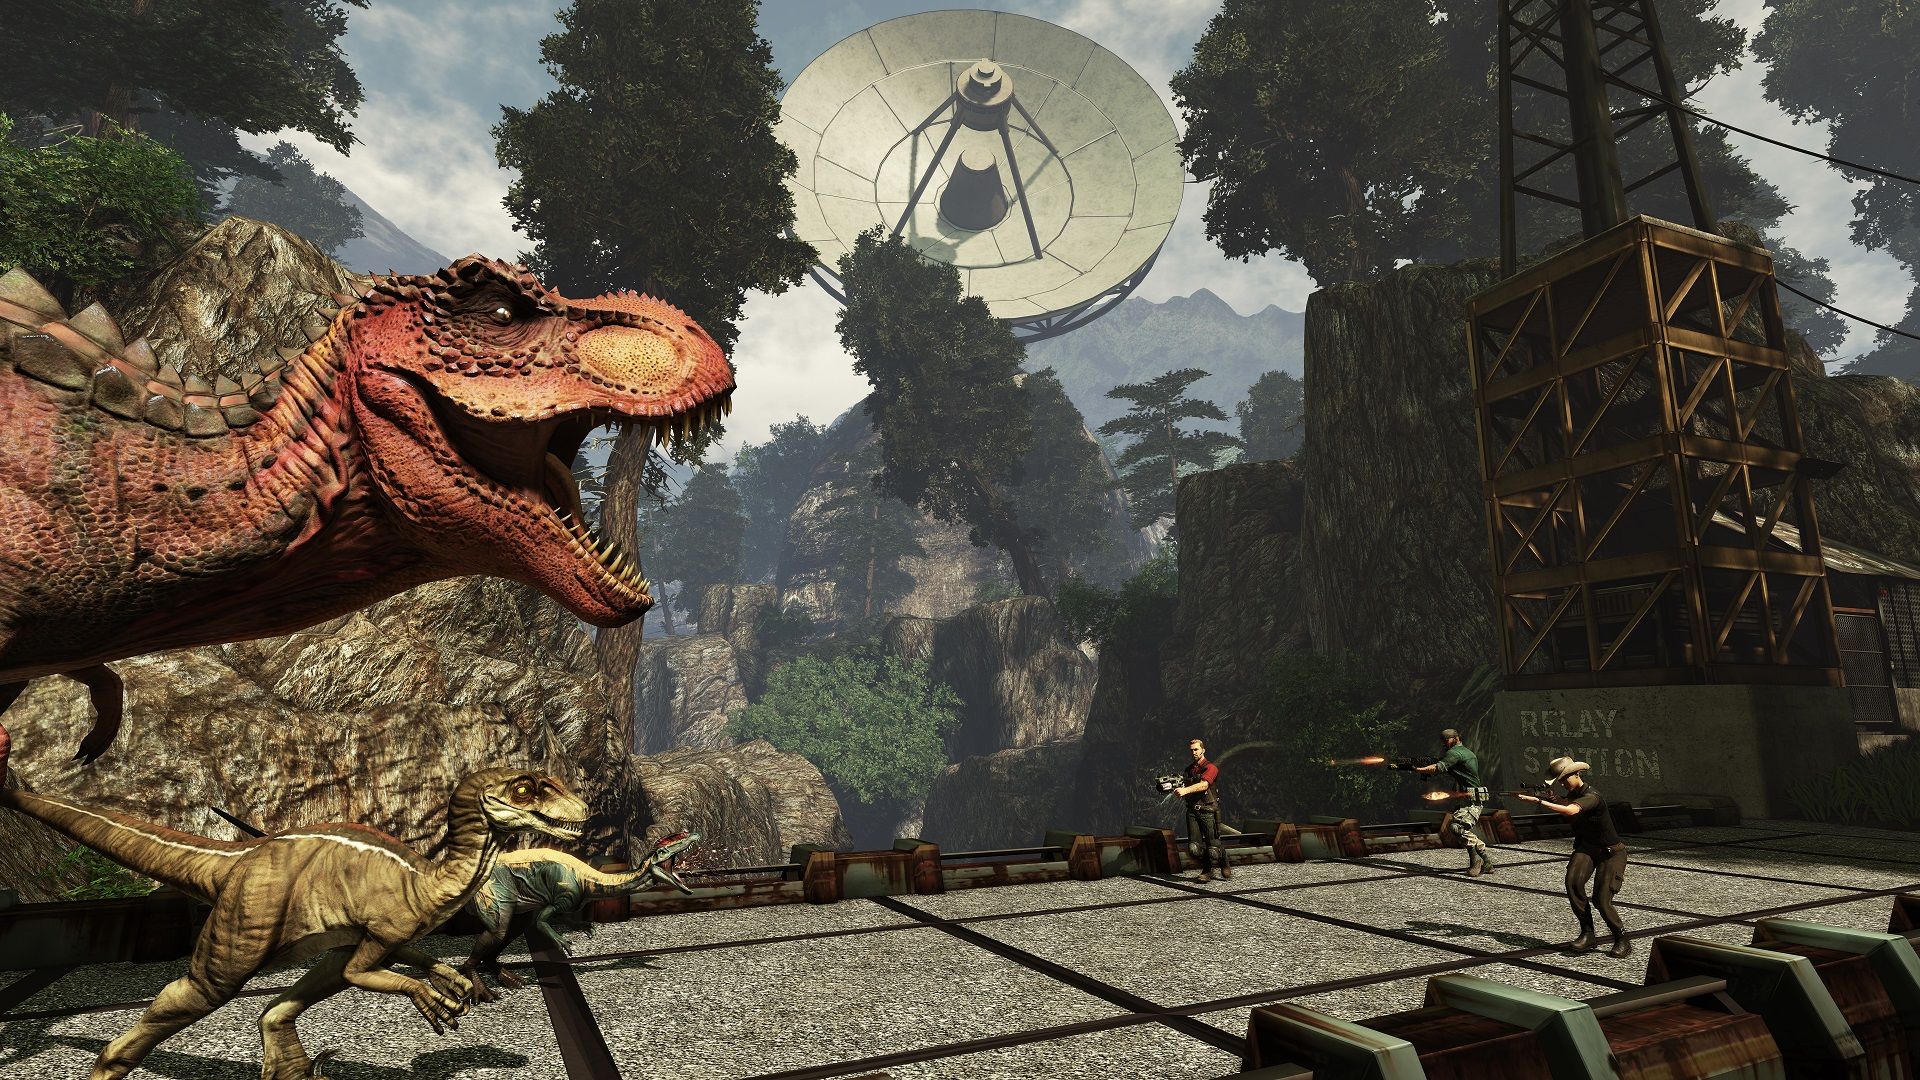 Primal Carnage: Extinction is coming to PS4 in 2015